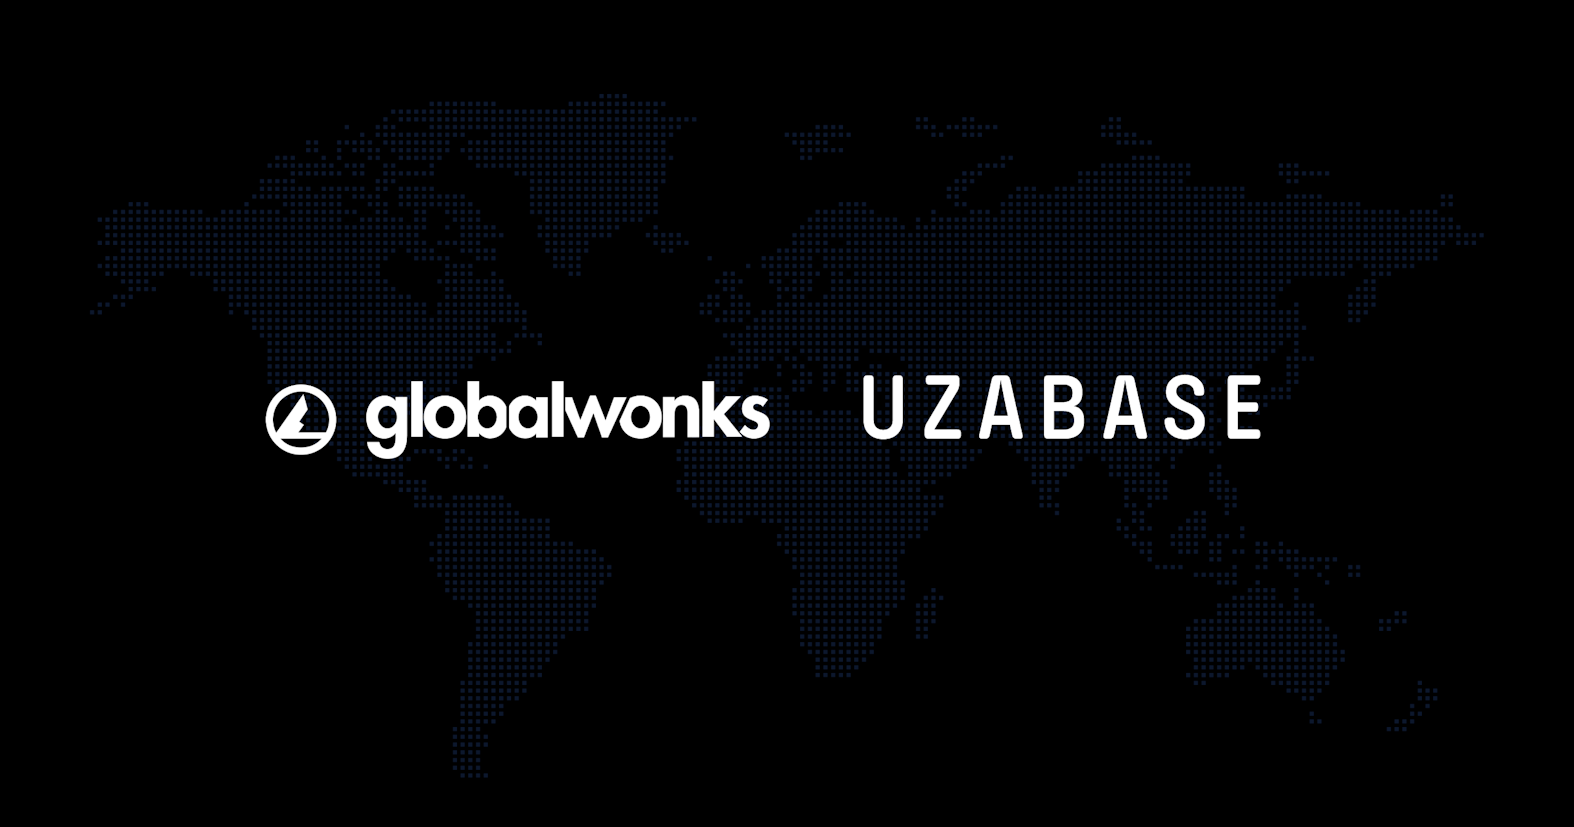 Uzabase Announces Alliance with “GlobalWonks”, Platform with Network of over 10,000 Global Knowledge Experts in more than 180 Countries Worldwide, Significantly Enhancing Access to Expert Insights